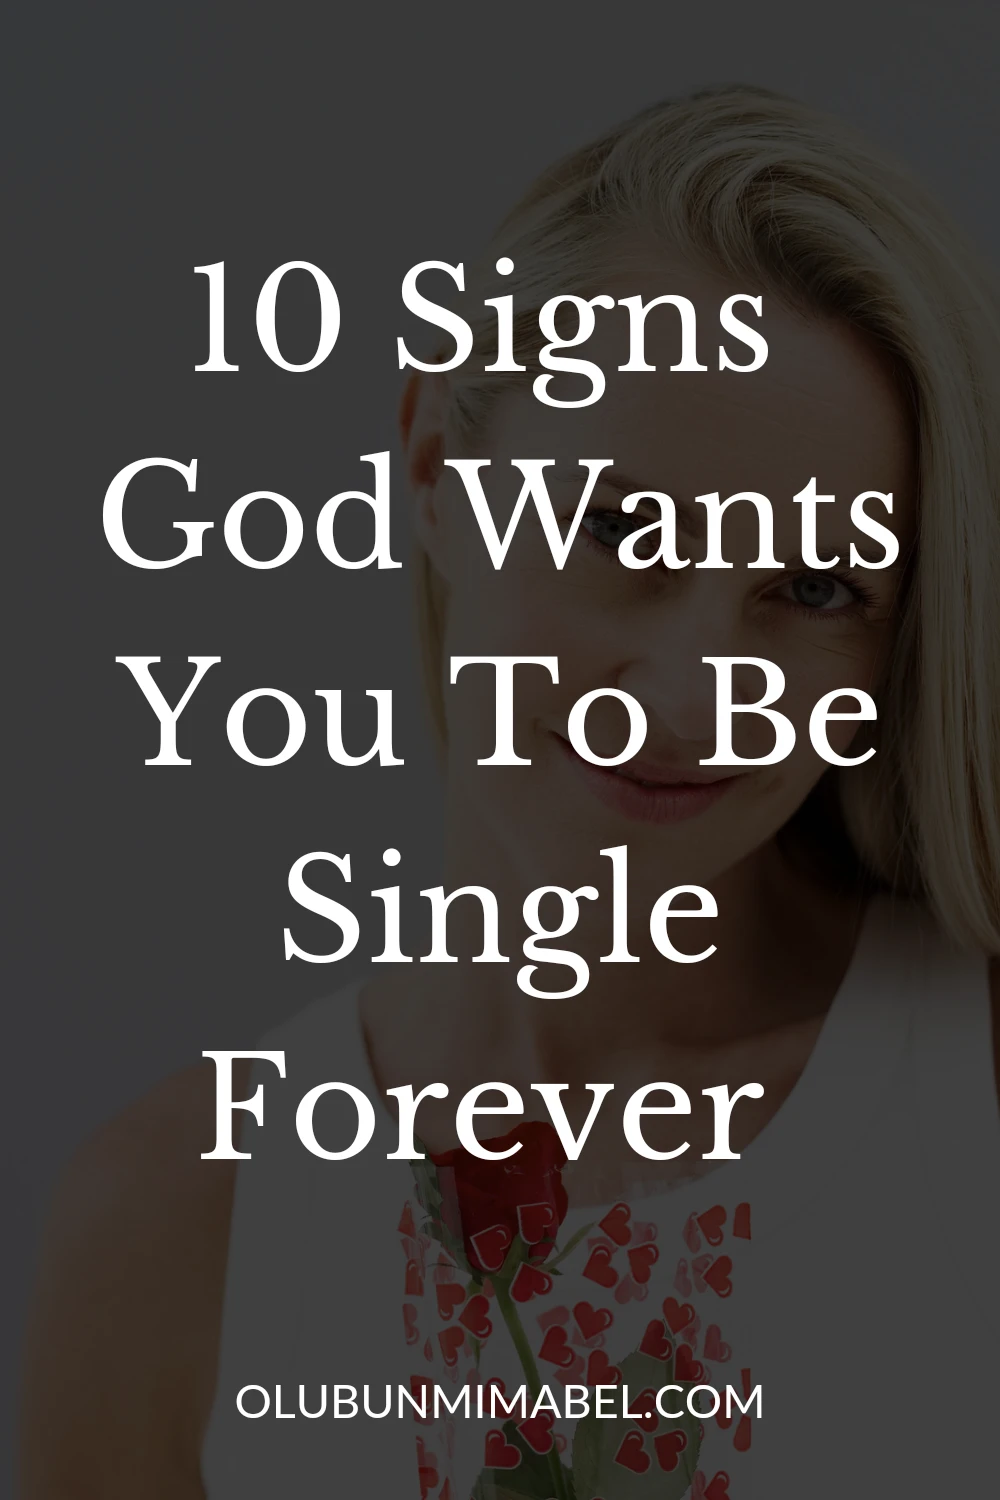 Signs God Wants You To Be Single Forever